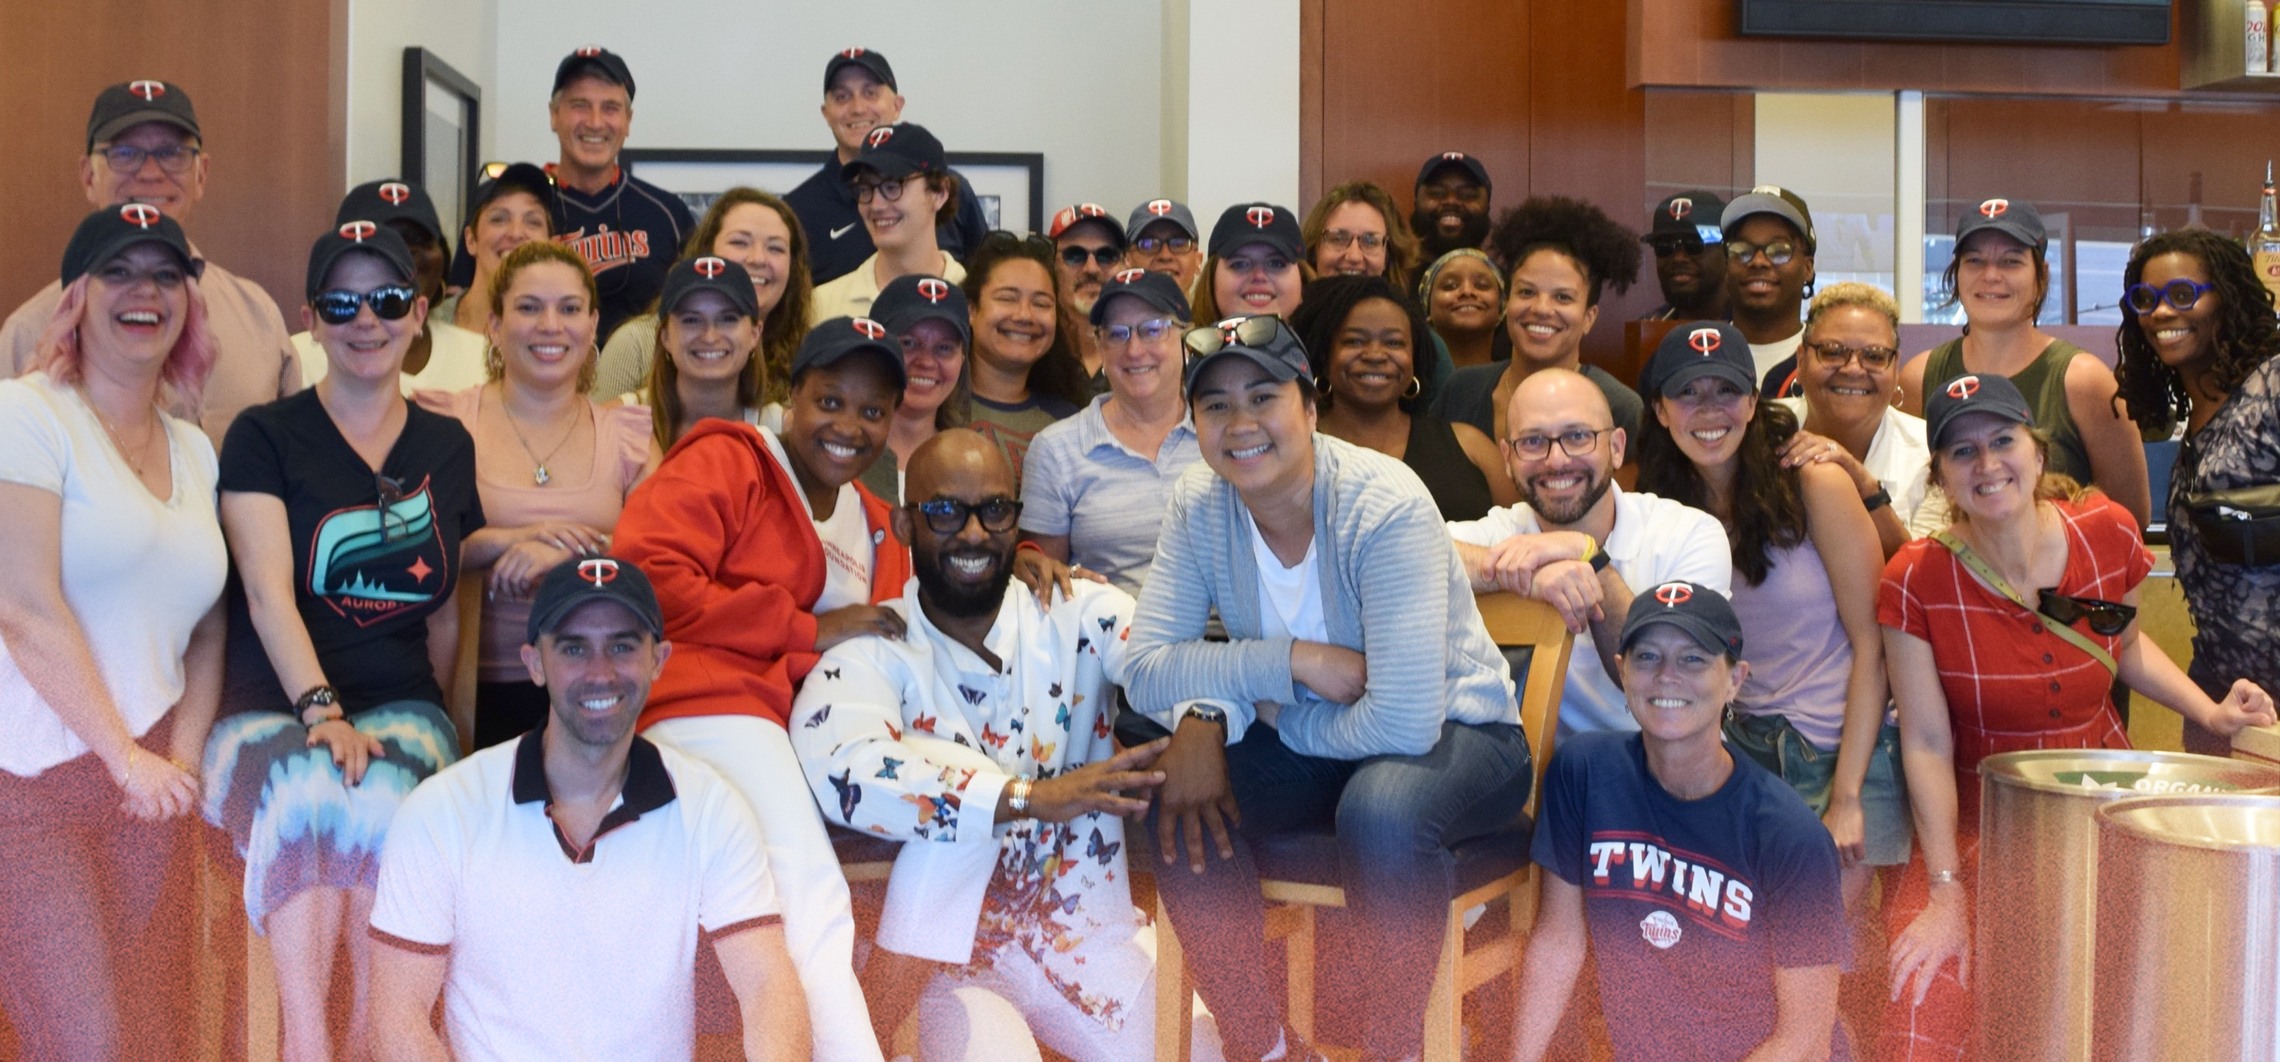 Minneapolis Foundation staff at the Twins game